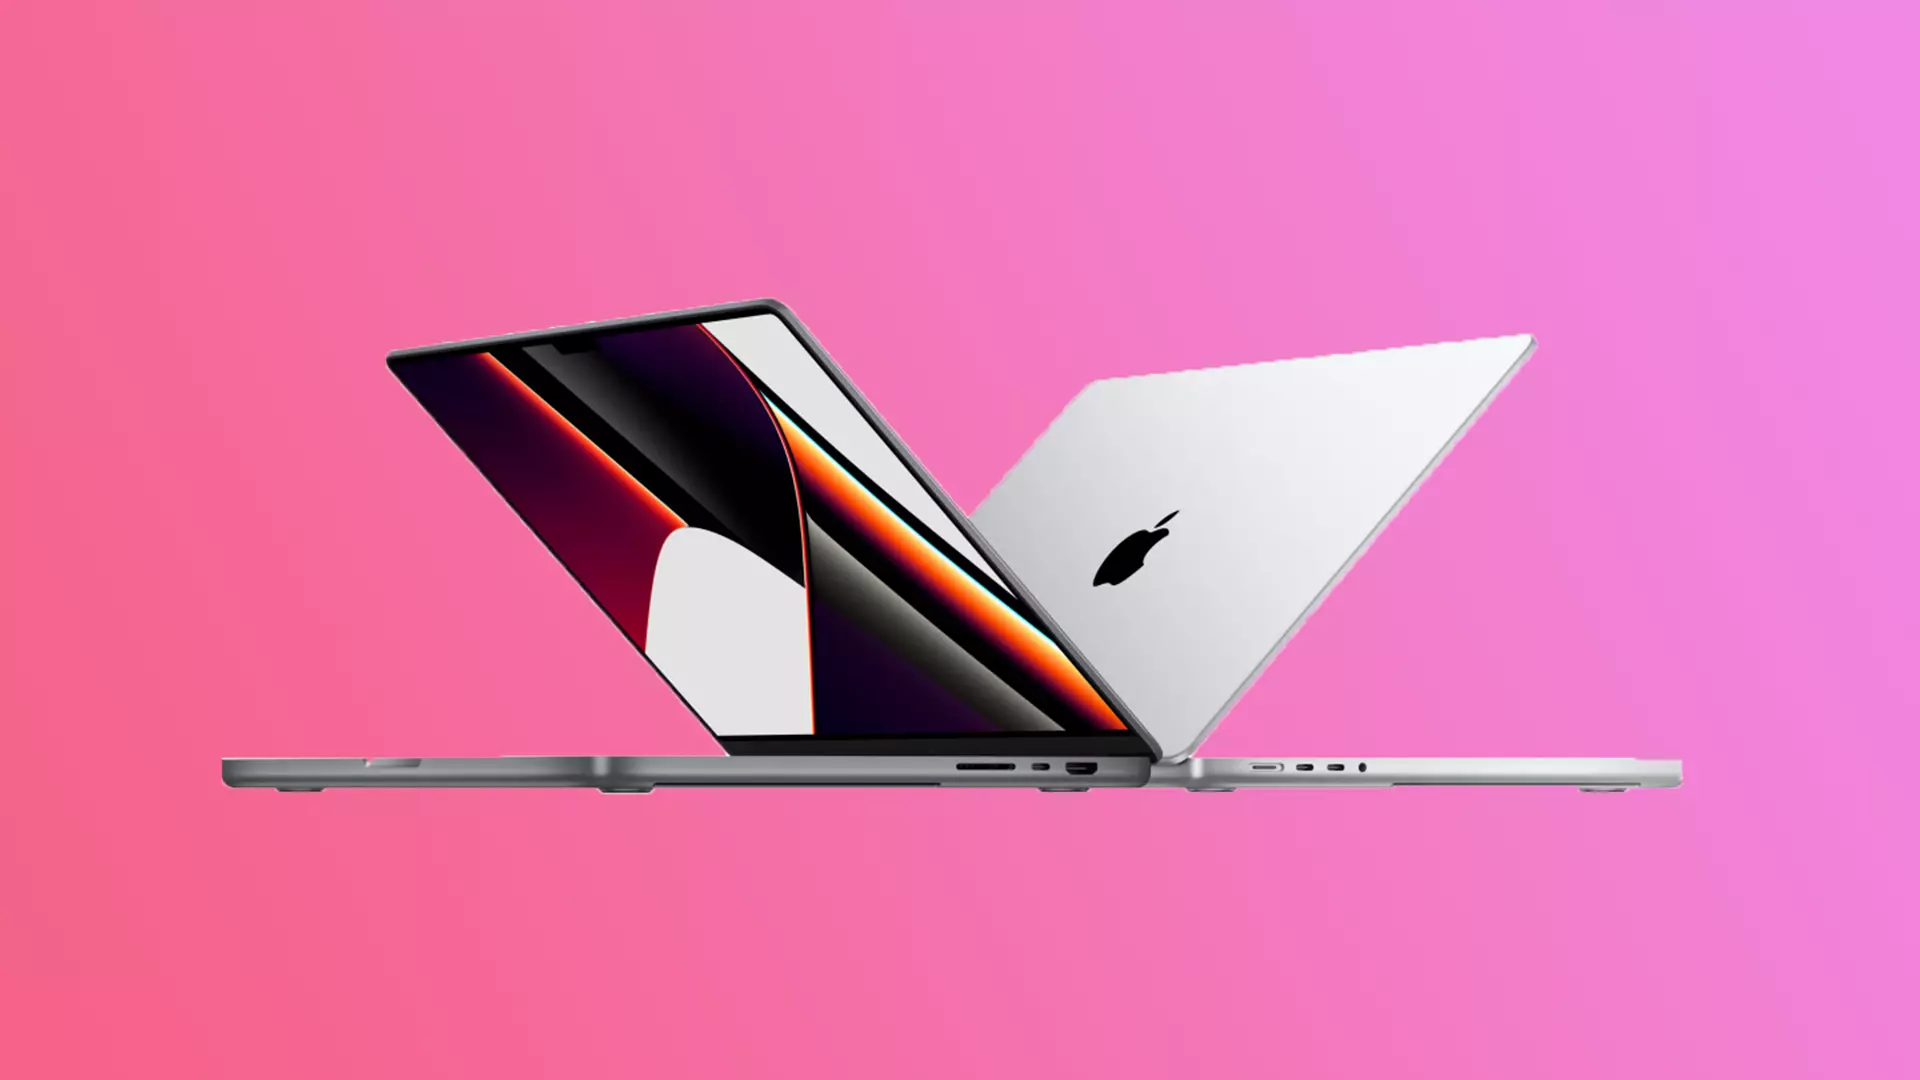 14-inch and 16-inch MacBook Pros are likely to appear next spring